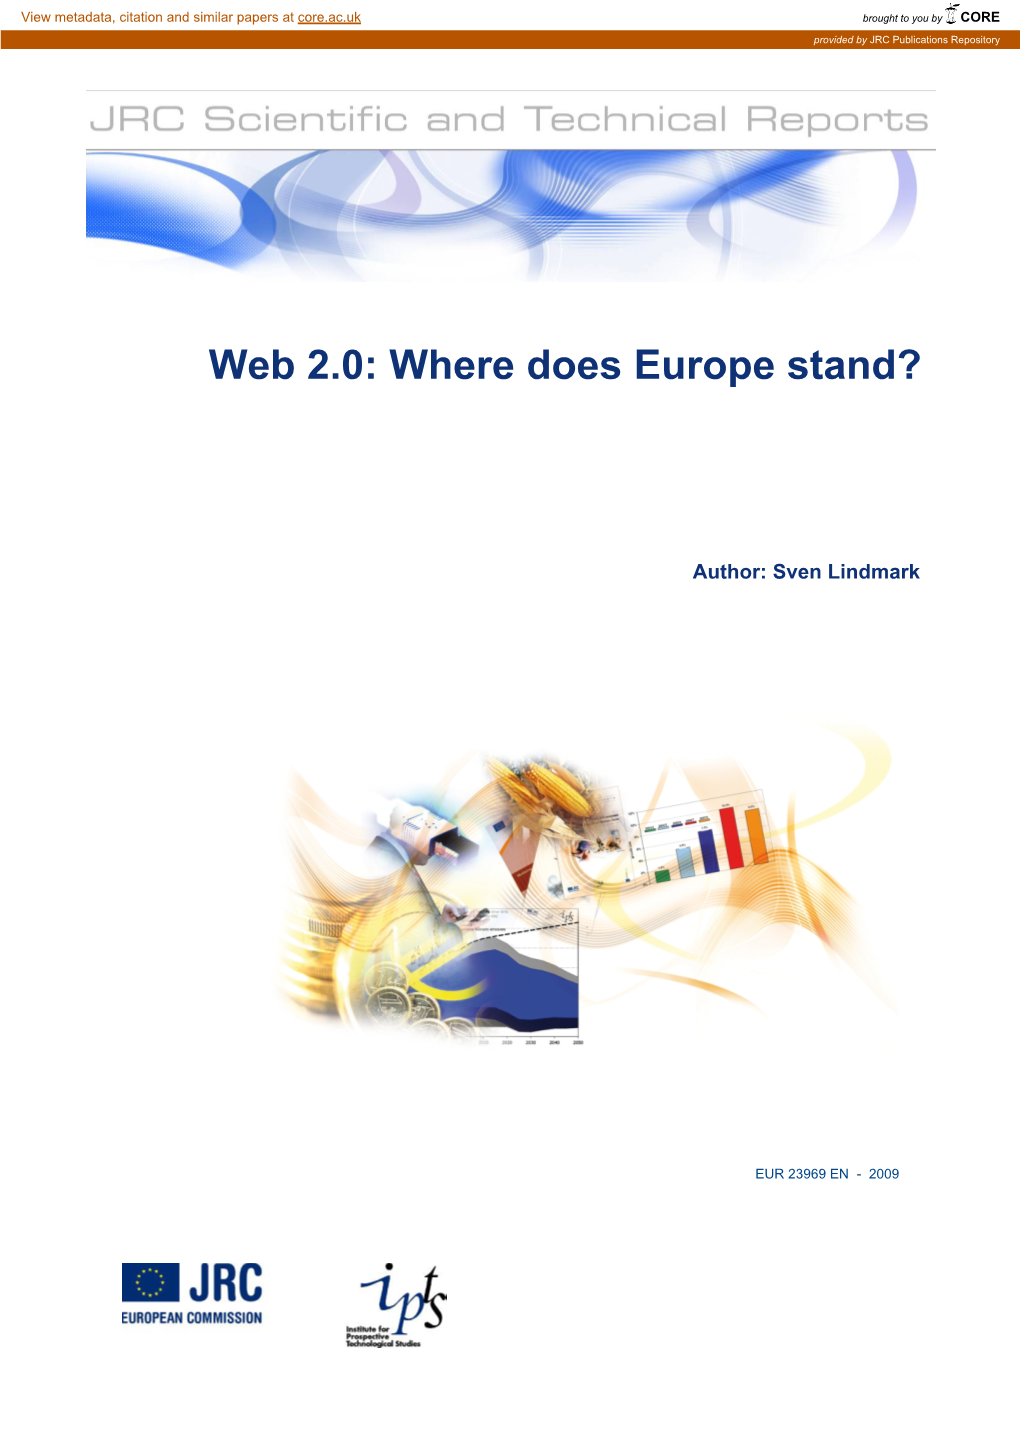 Web 2.0: Where Does Europe Stand?